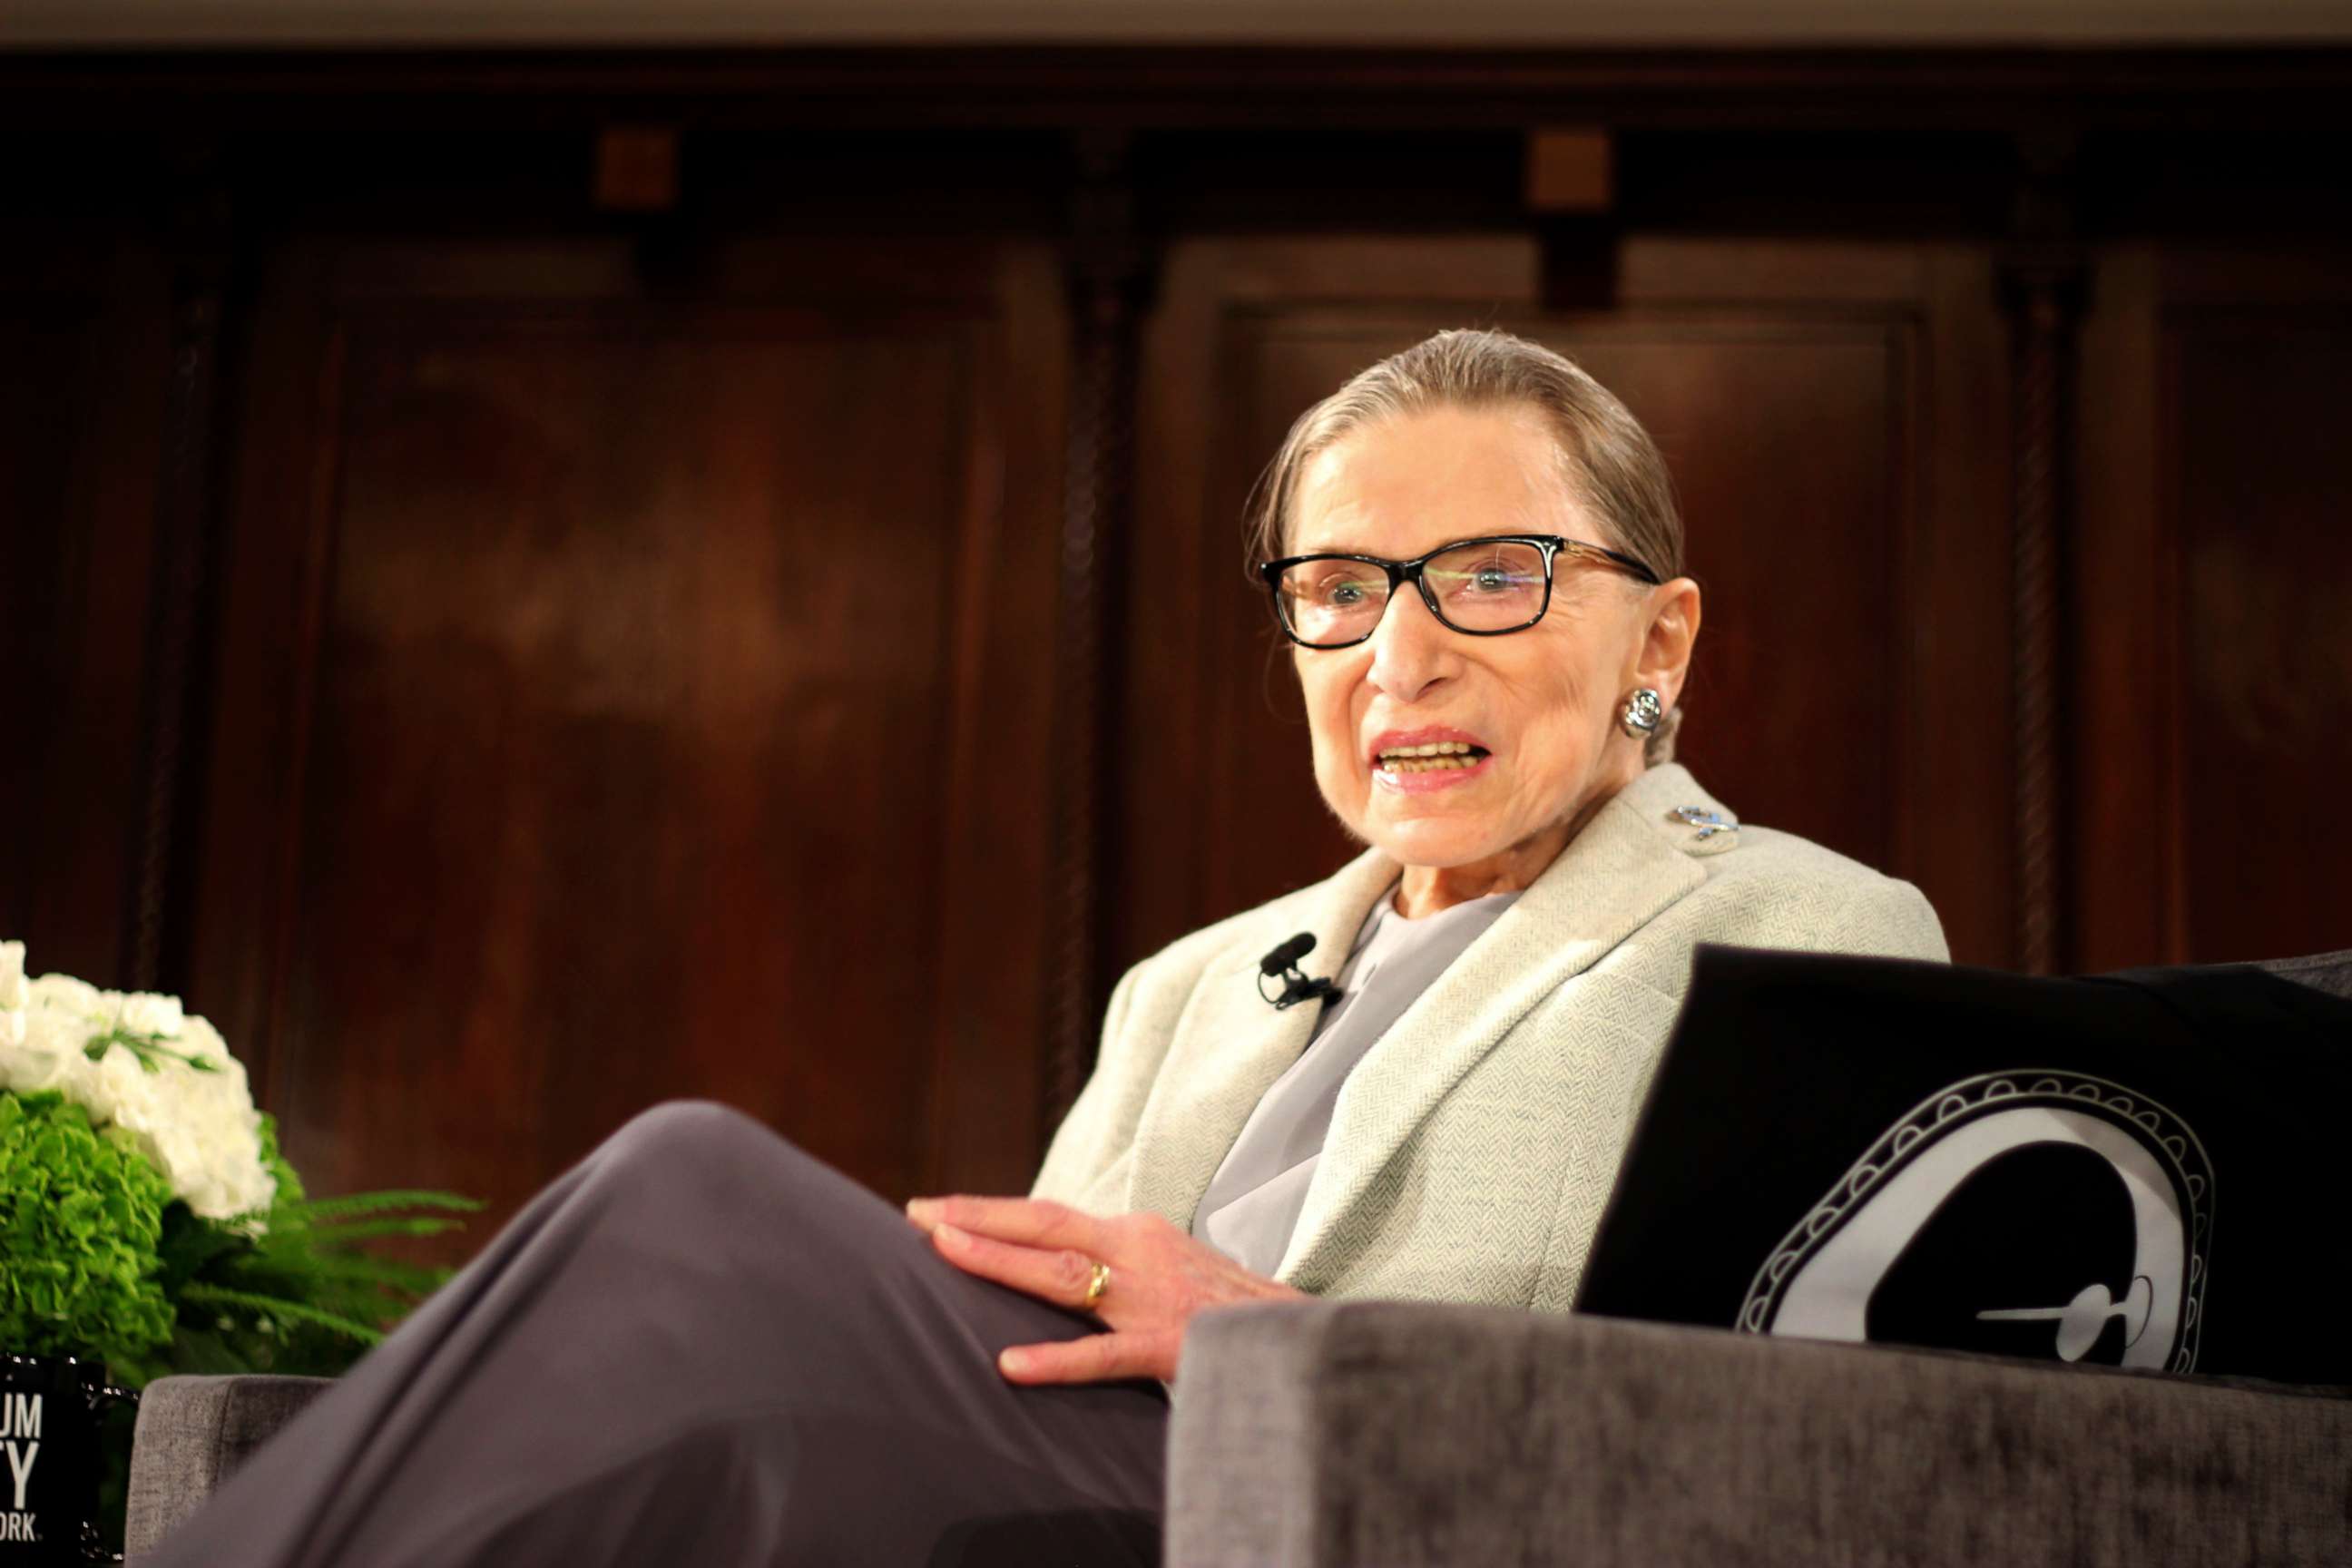 PHOTO: Supreme Court Justice Ruth Bader Ginsburg sits onstage as a speaker of the David Berg Distinguished Speakers Series held at the New York Academy of Medicine, Dec. 15, 2018, in New York.